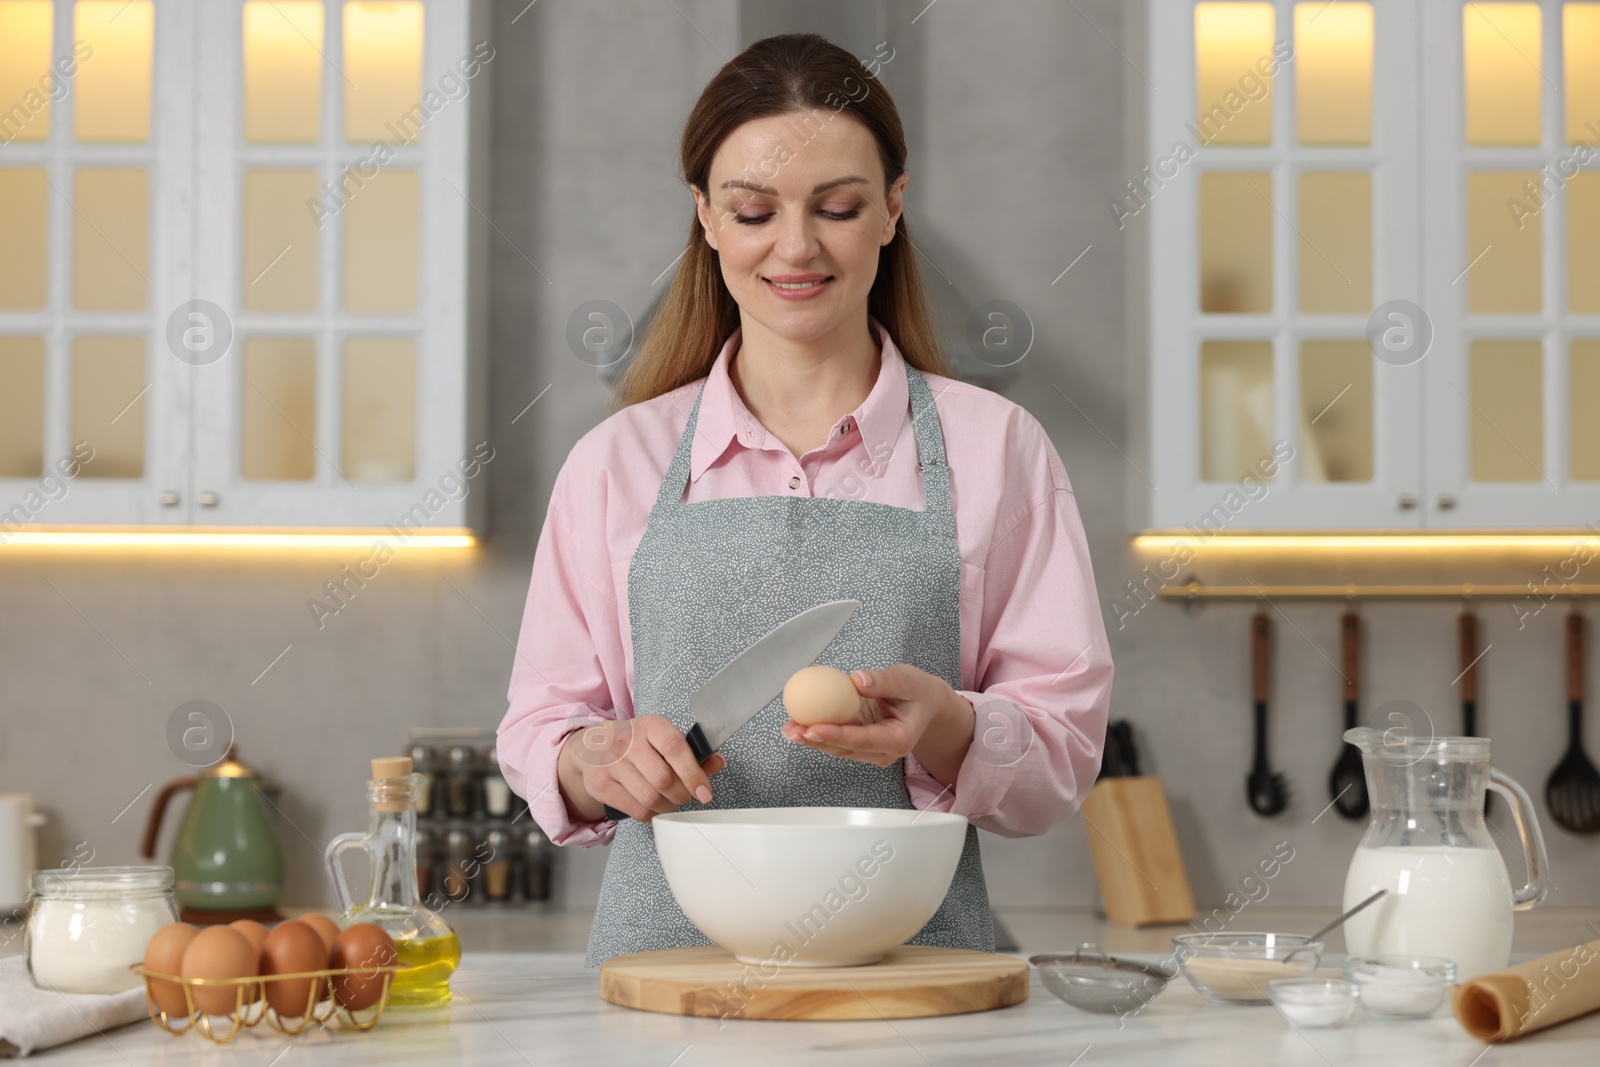 Photo of Making bread. Woman putting raw egg into bowl at white table in kitchen